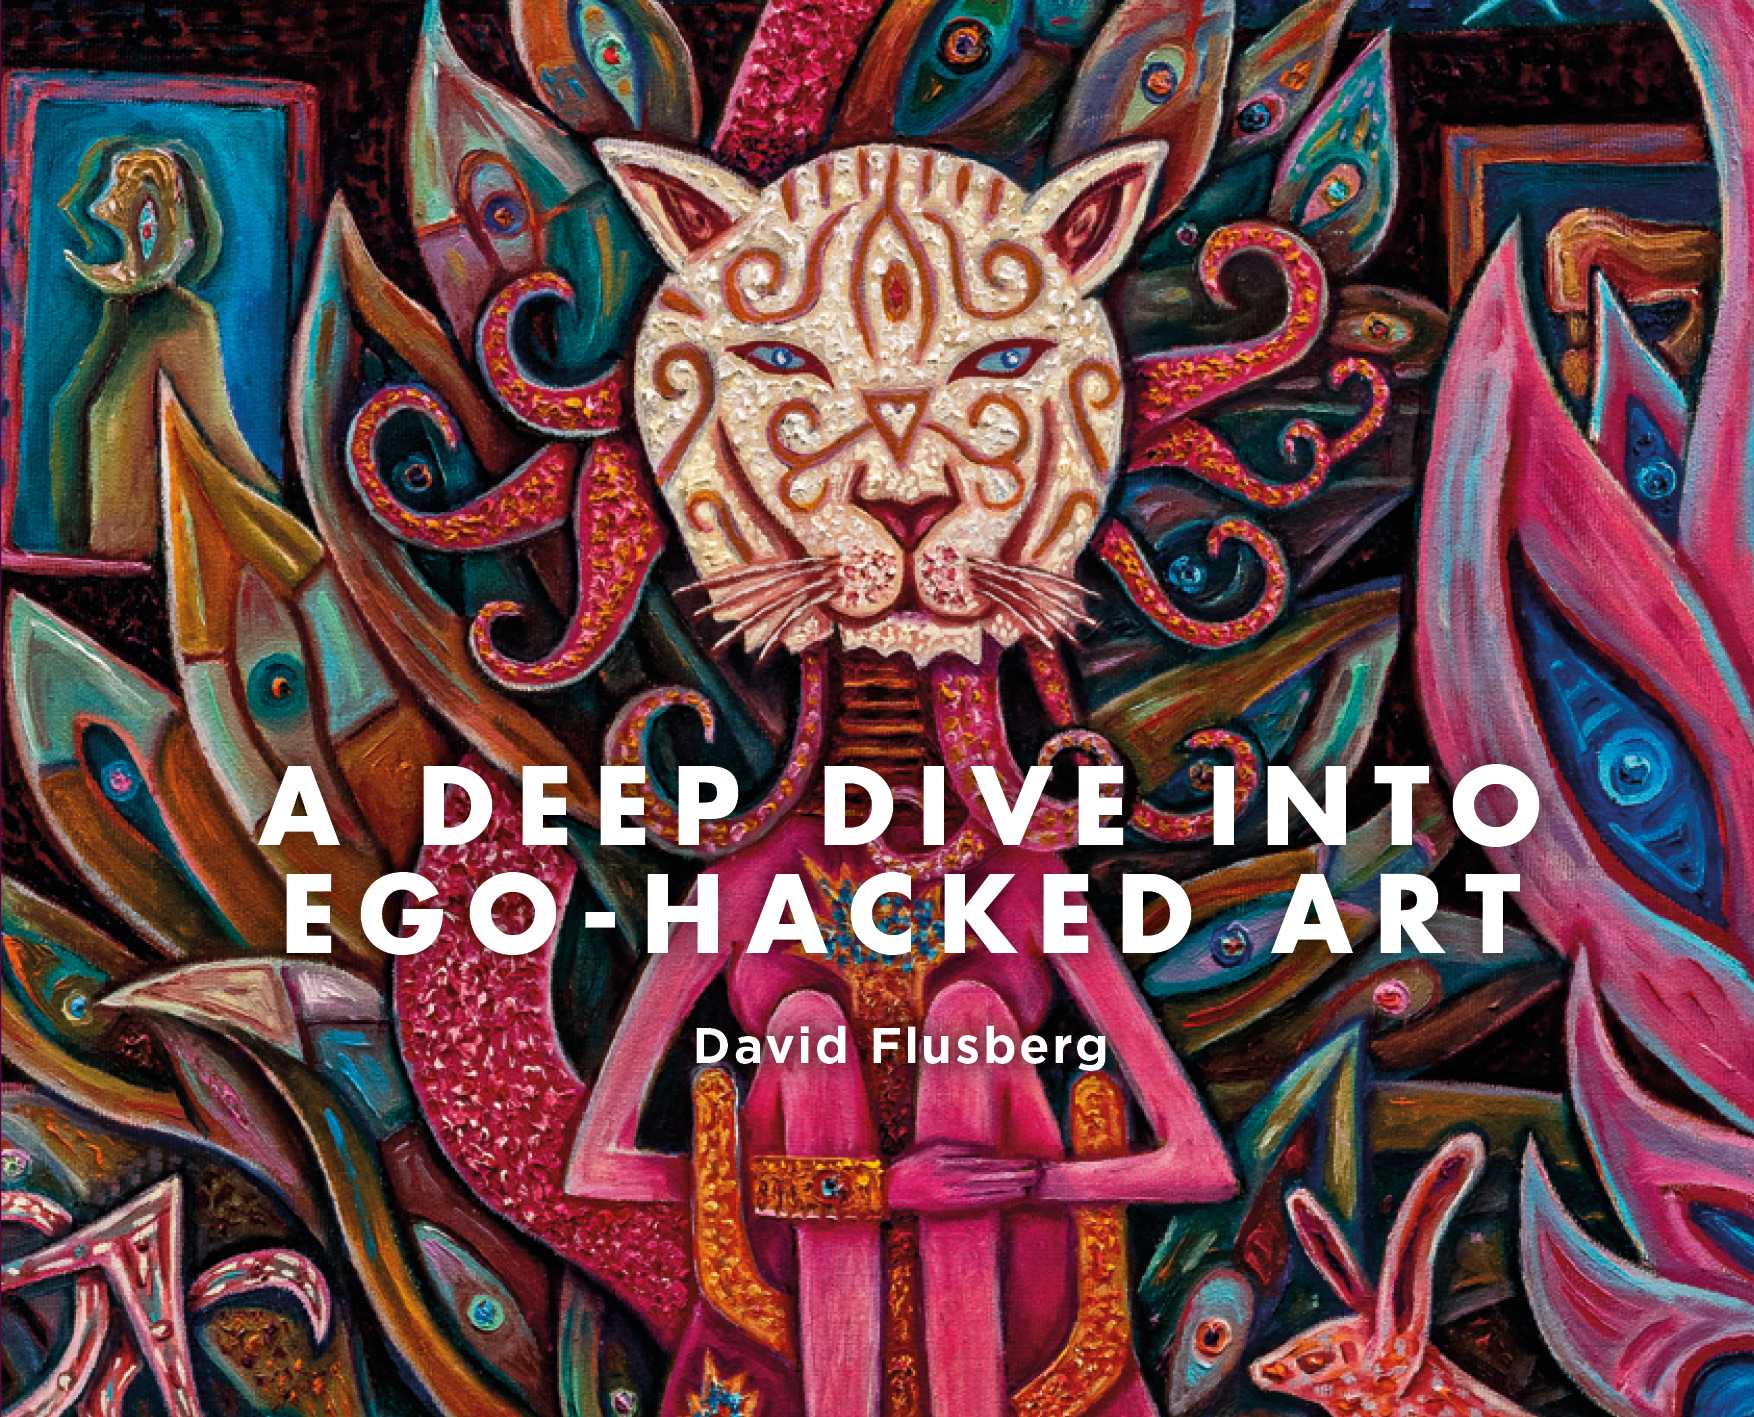 A Deep Dive Into Ego-Hacked Art